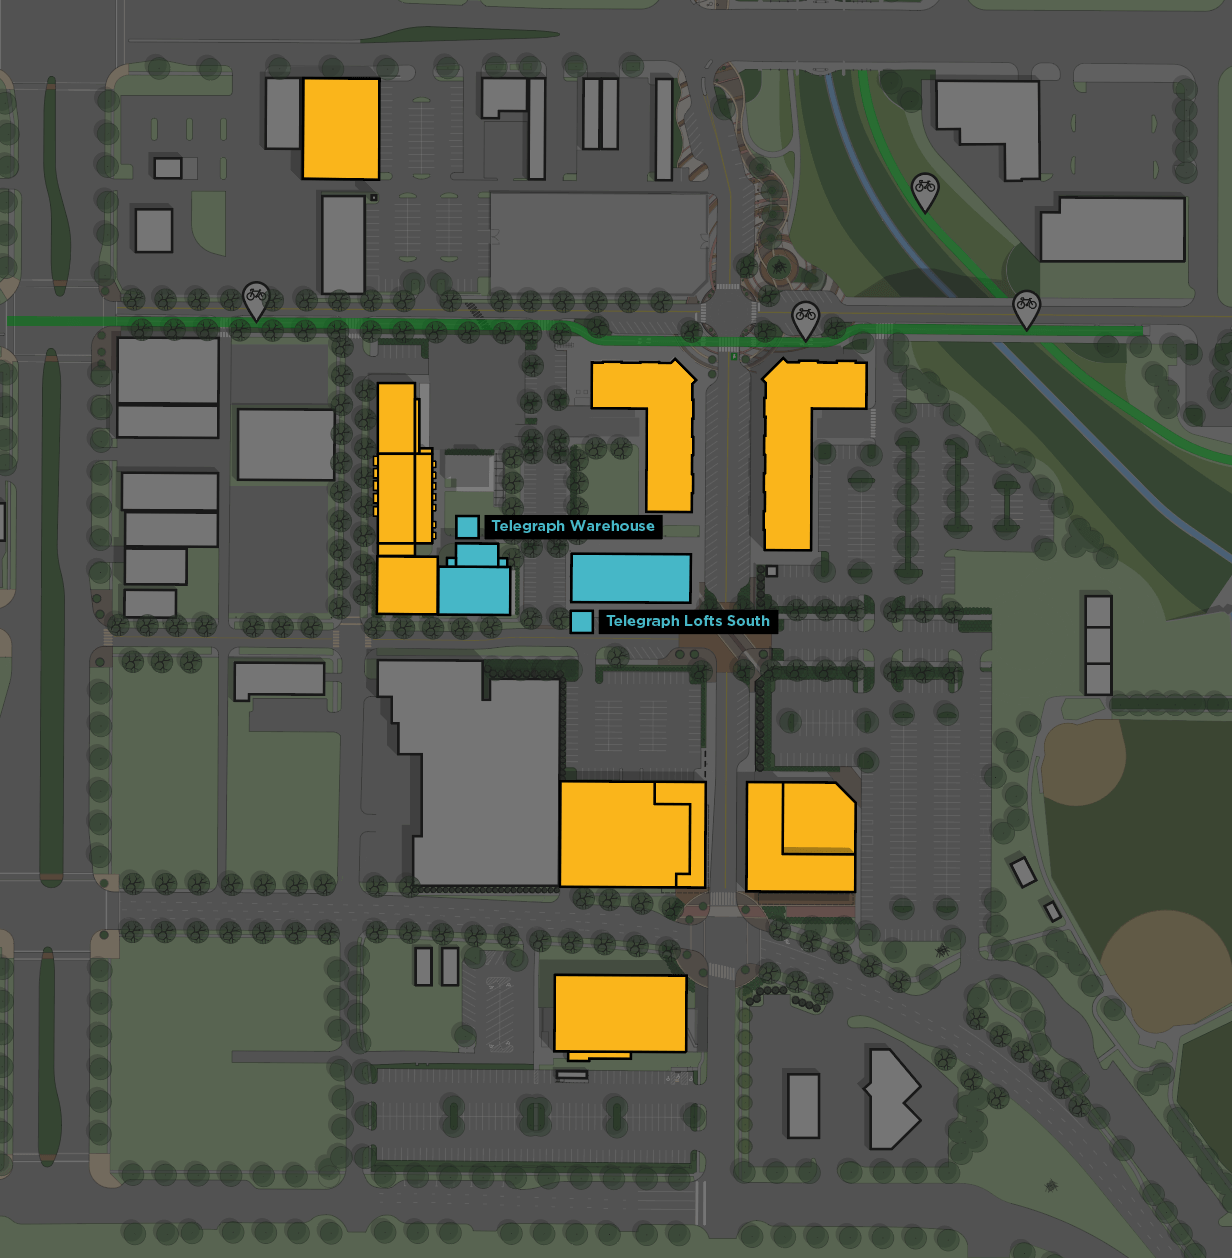 District Map for Up and Running - Includes: Telegraph Lofts West and Lofts South